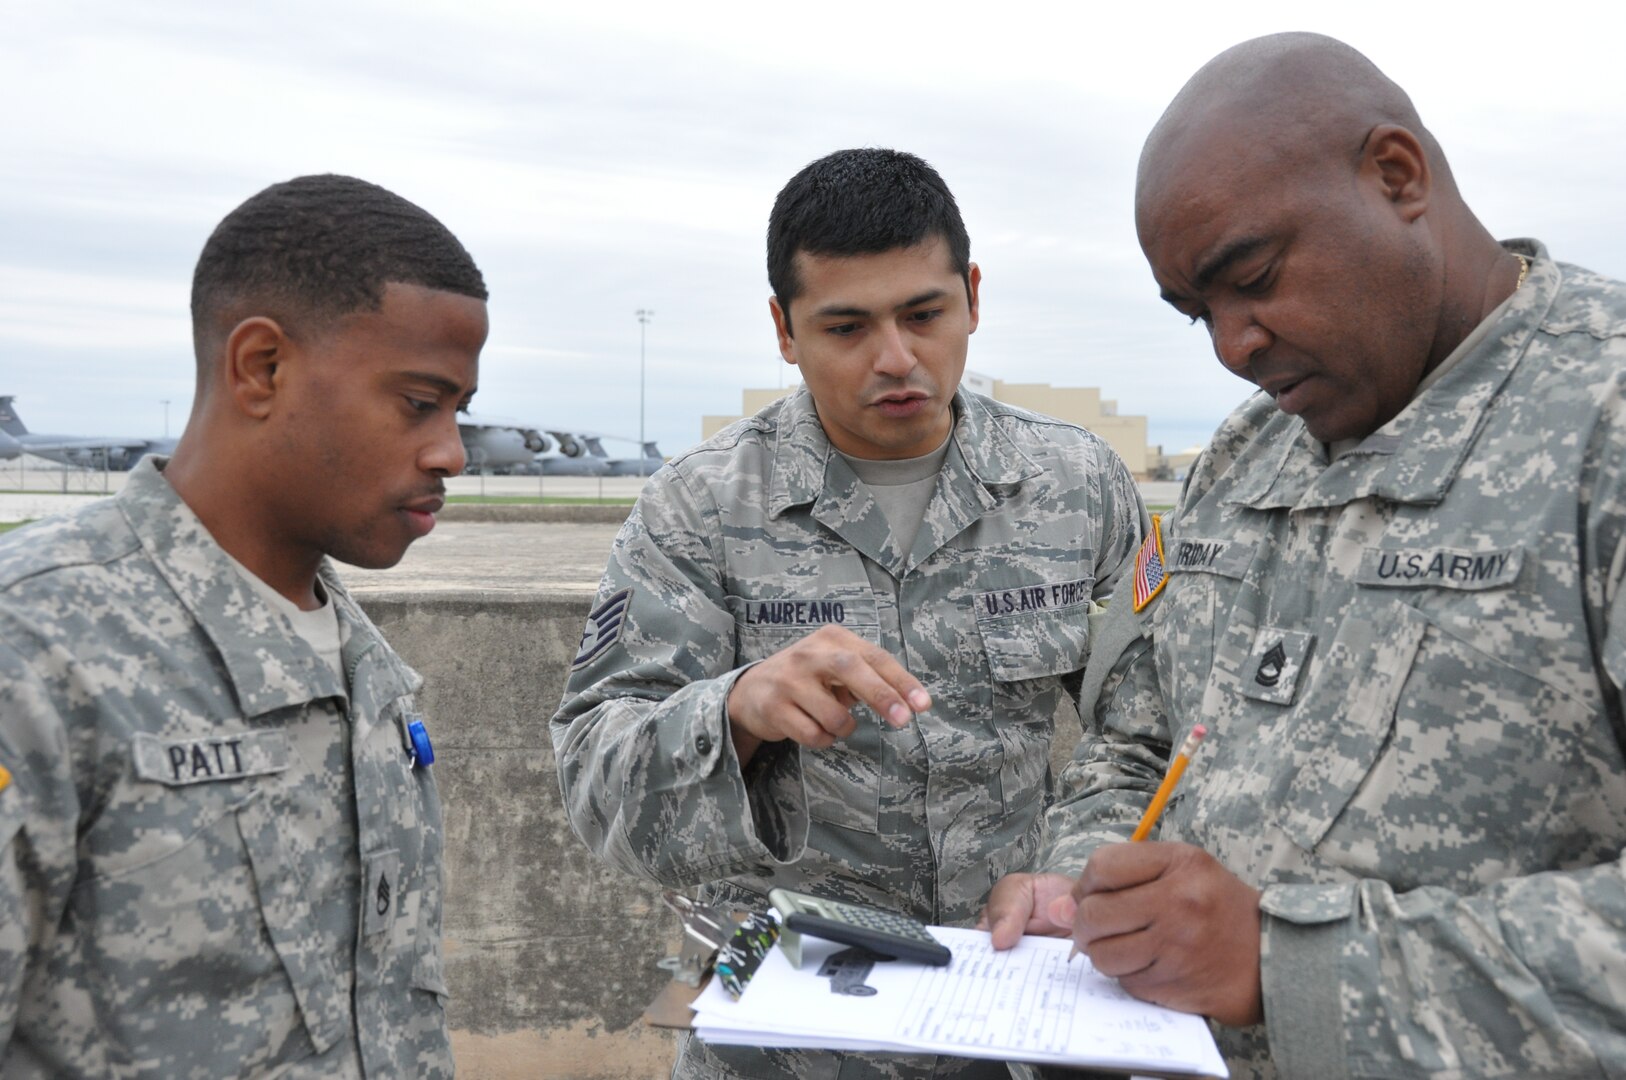 Staff Sgt. Joseph Patt, an Army North Task Force-51 communications noncommissioned officer, listens as Staff Sgt. Julio Laureano (center), a 74th Aerial Port Squadron air transportation special handler, explains to Sgt. 1st Class Friday Steadman, an Army North Task Force-51 mobility NCO, how to solve a problem when weighing a vehicle to be up loaded to a C-5A Galaxy aircraft on April 5, 2014 at Joint Base San Antonio-Lackland, Texas.  Task Force-51 from Joint Base San Antonio-Ft. Sam Houston, mission is responding to hazards and incidents in the United States that require Department of Defense assistance. (U.S. Air Force photo by Tech Sgt. Carlos J. Trevino)